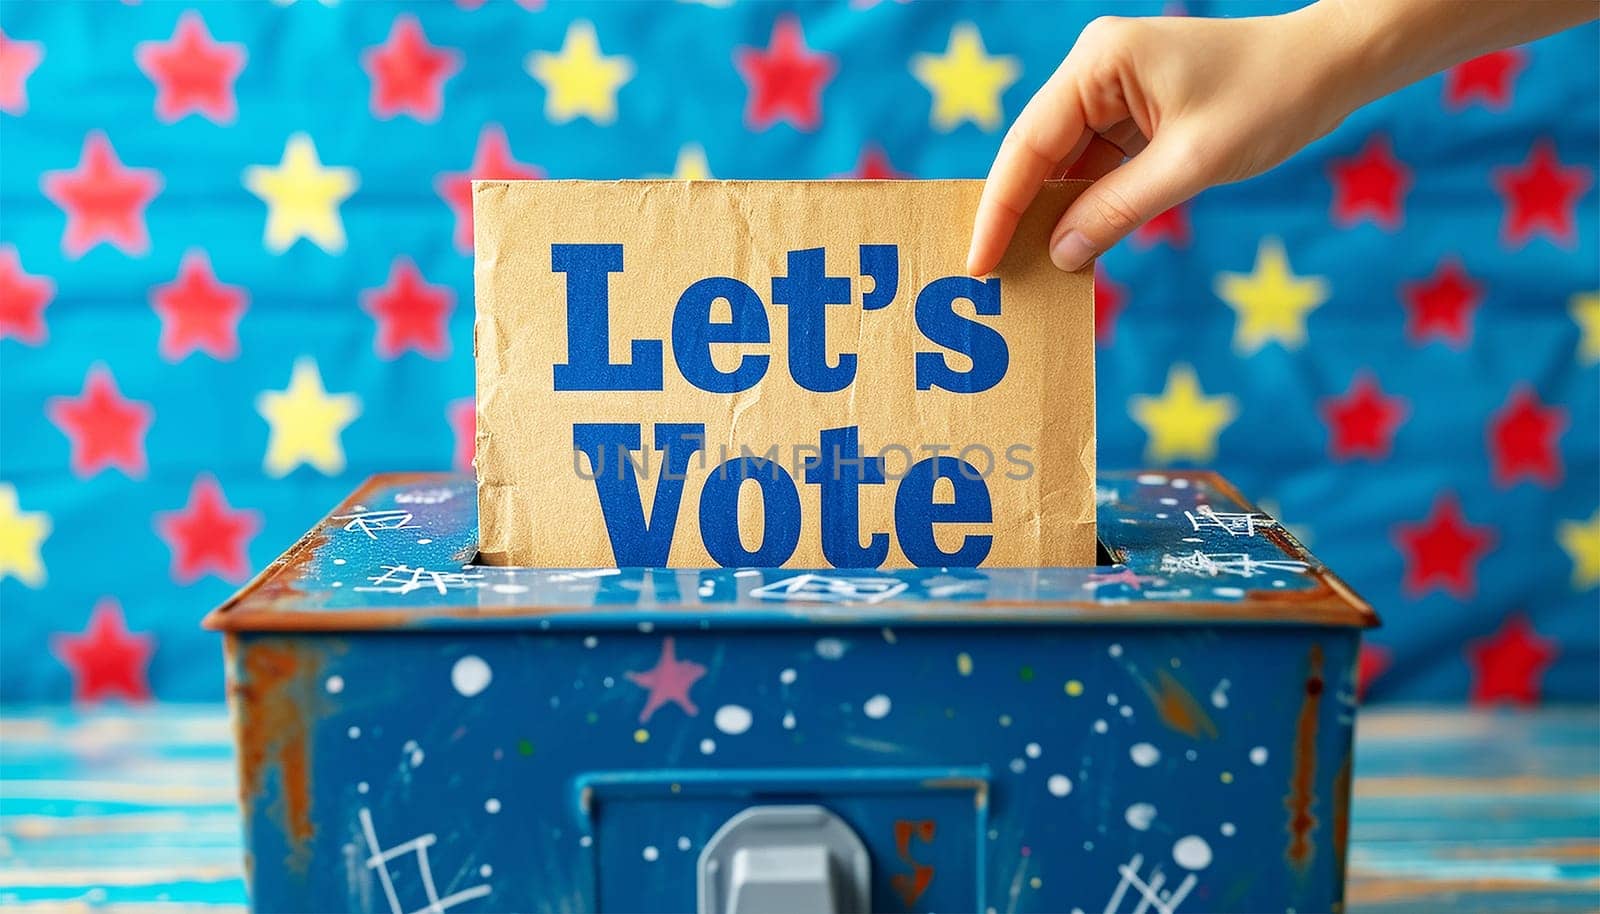 Text "Let's vote" Flat presidential election and democracy political president, governor, or parliament member with election and referendum freedom to hand wood vote copy space